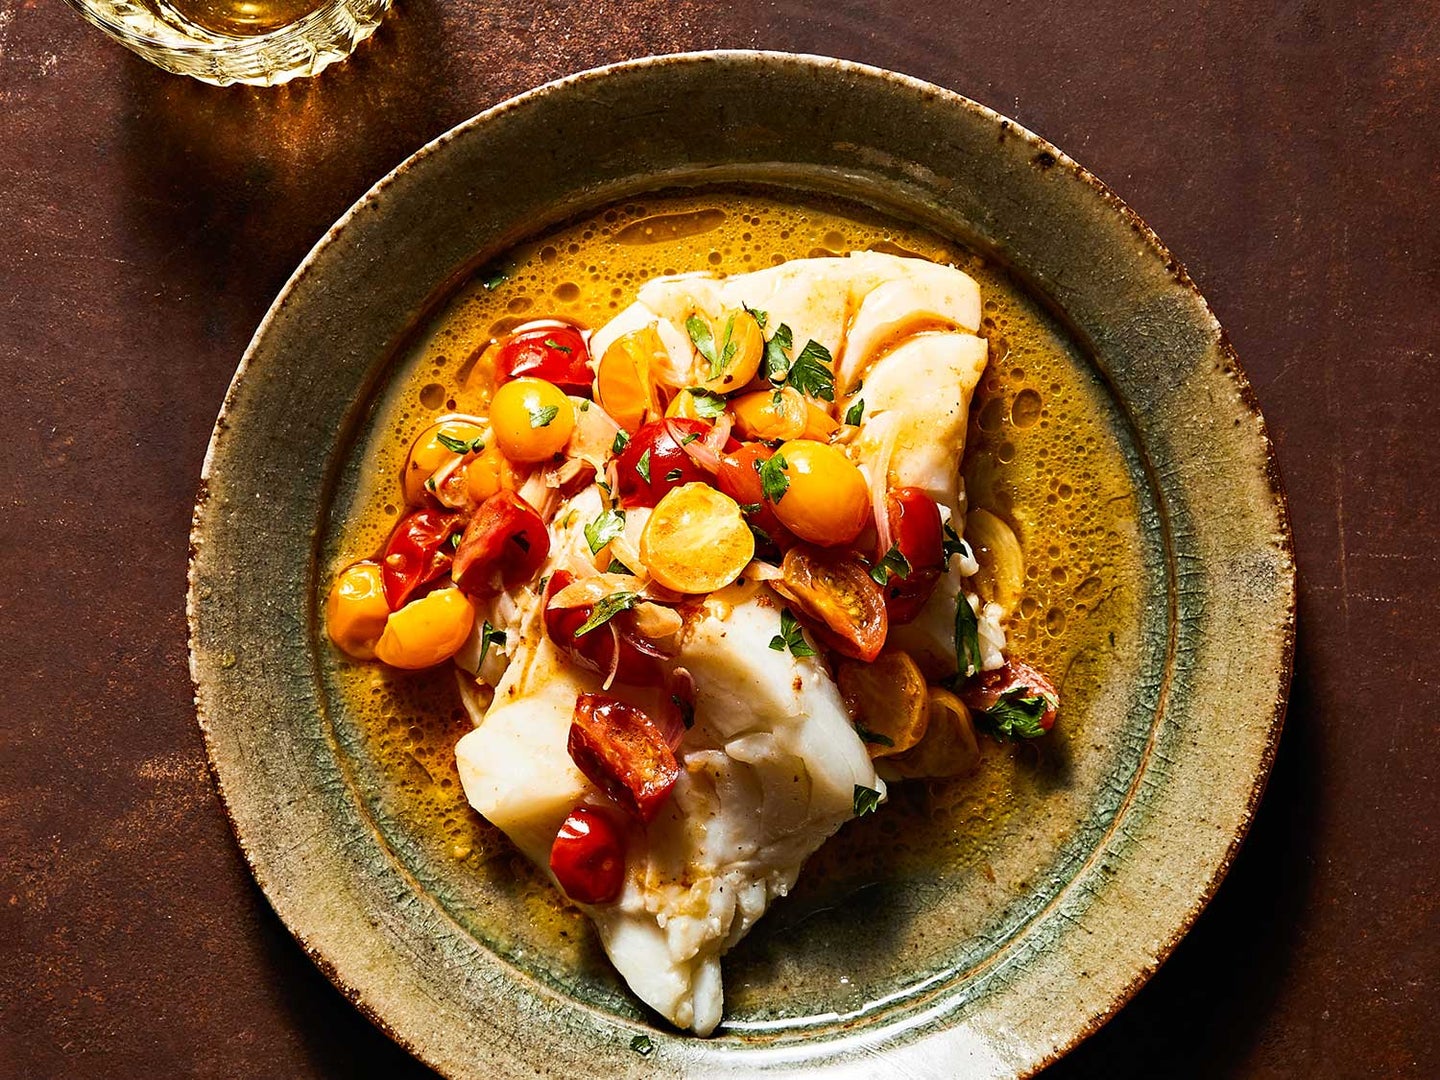 Skillet Cod with Brown-Butter Tomato Sauce